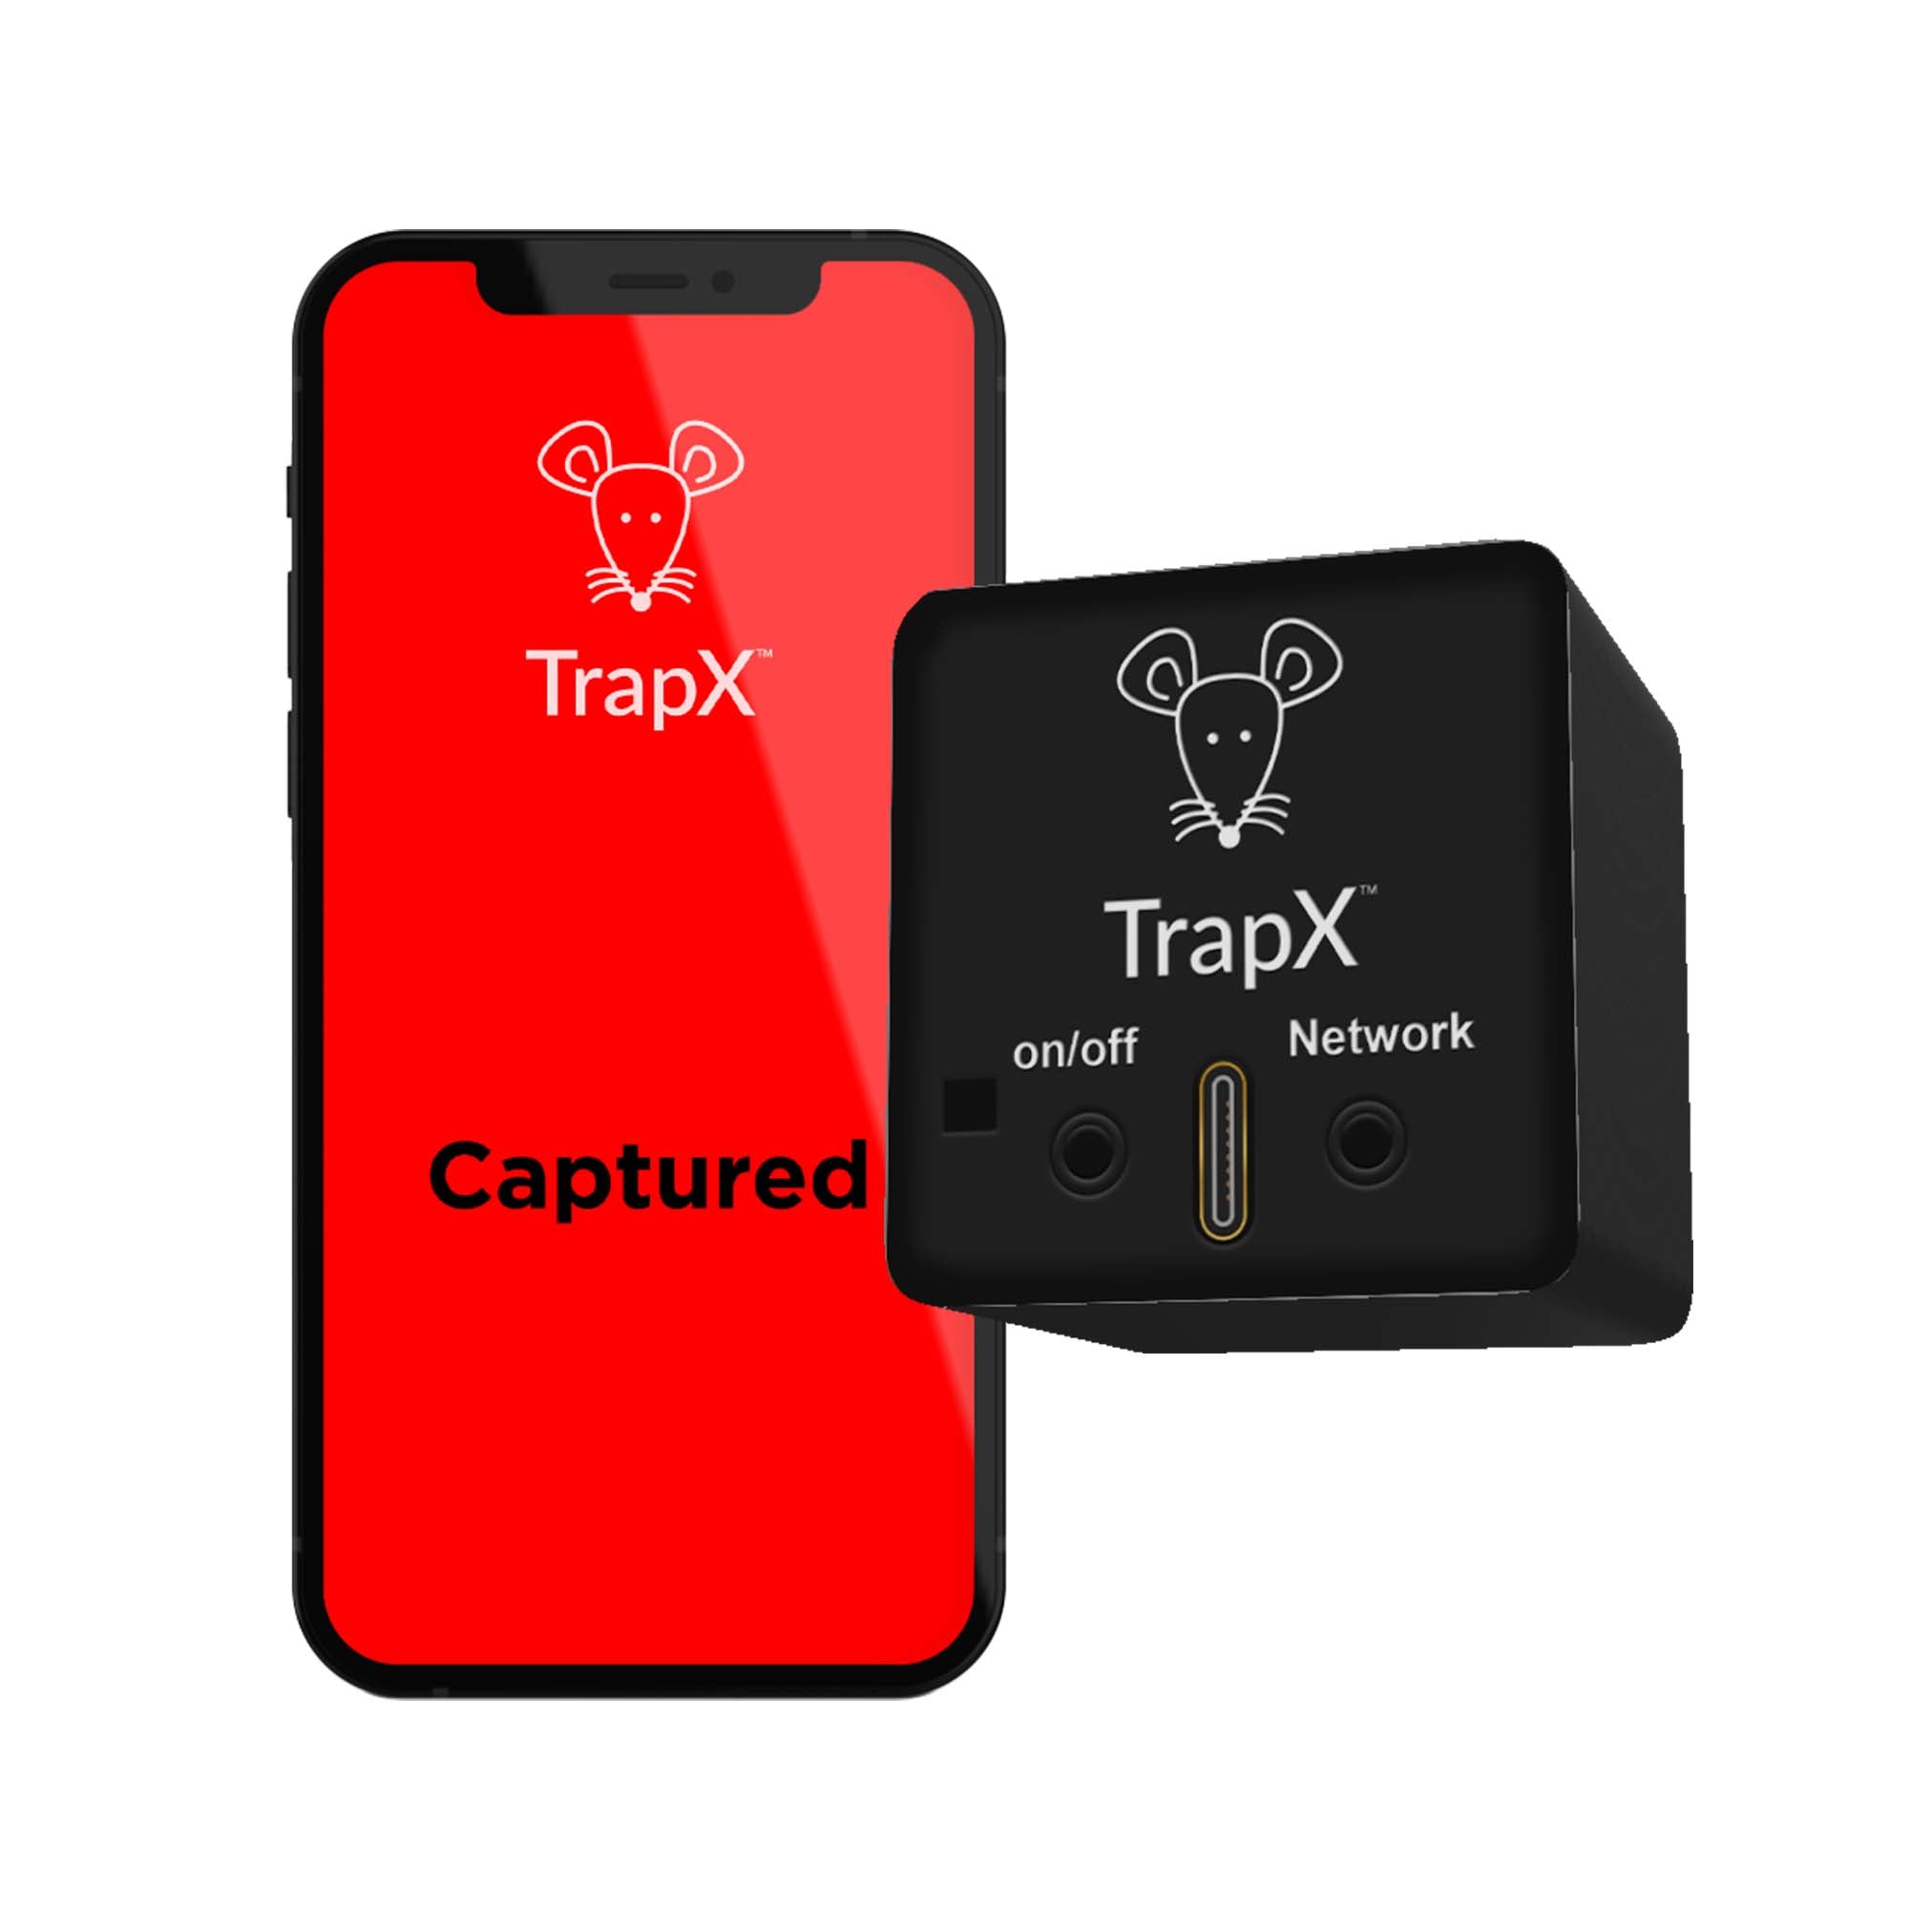 Why should I choose TrapX for my organization?